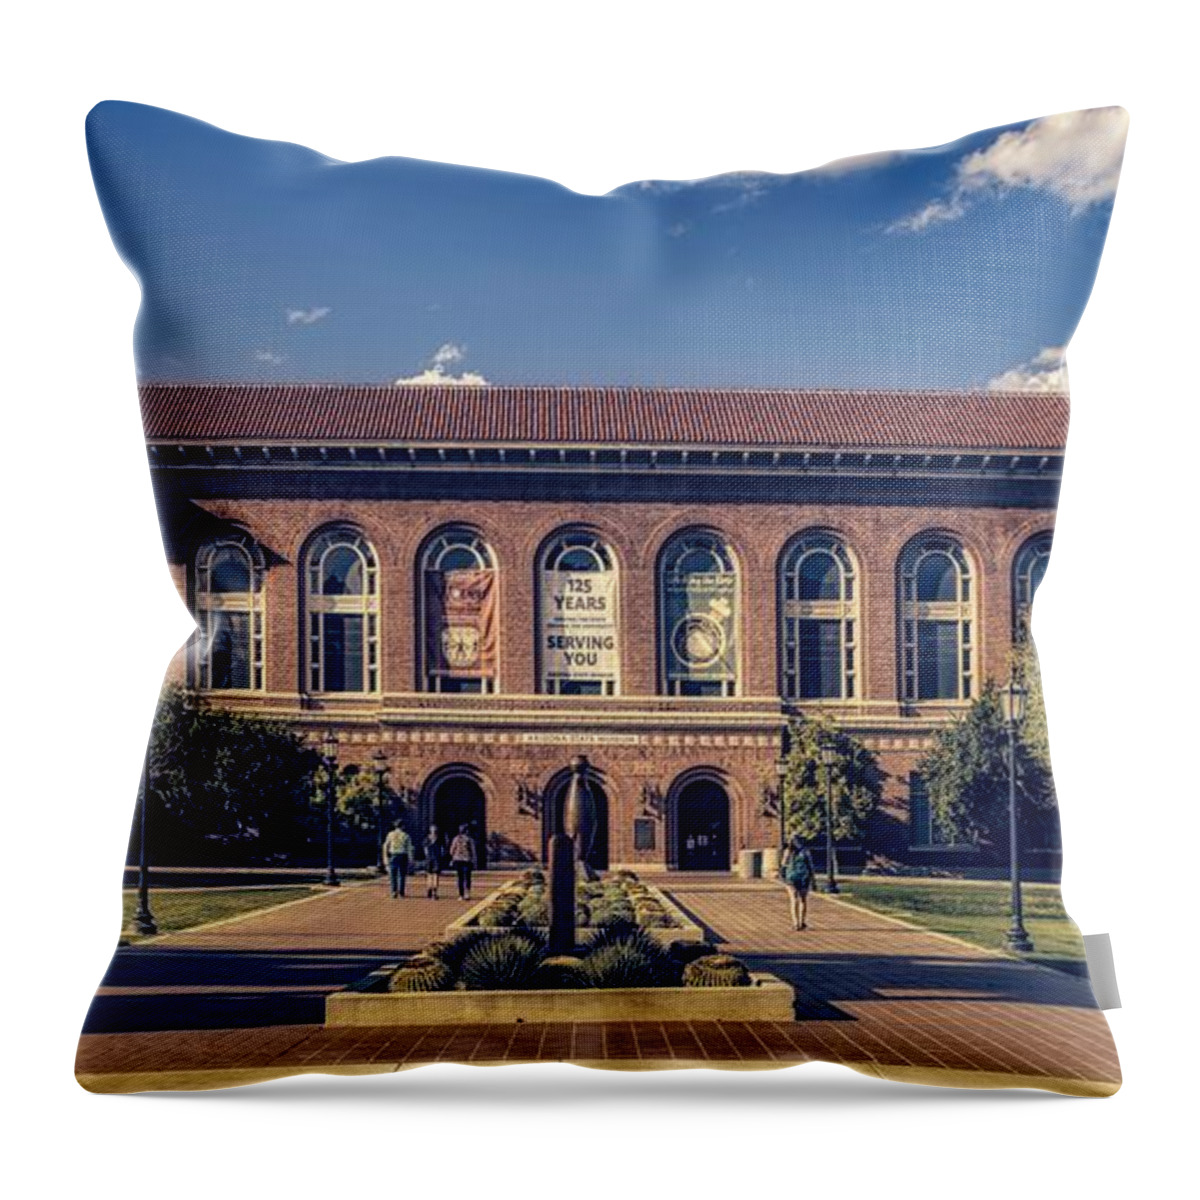 Arizona State Museum Throw Pillow featuring the photograph Arizona State Museum - University Of Arizona by Mountain Dreams